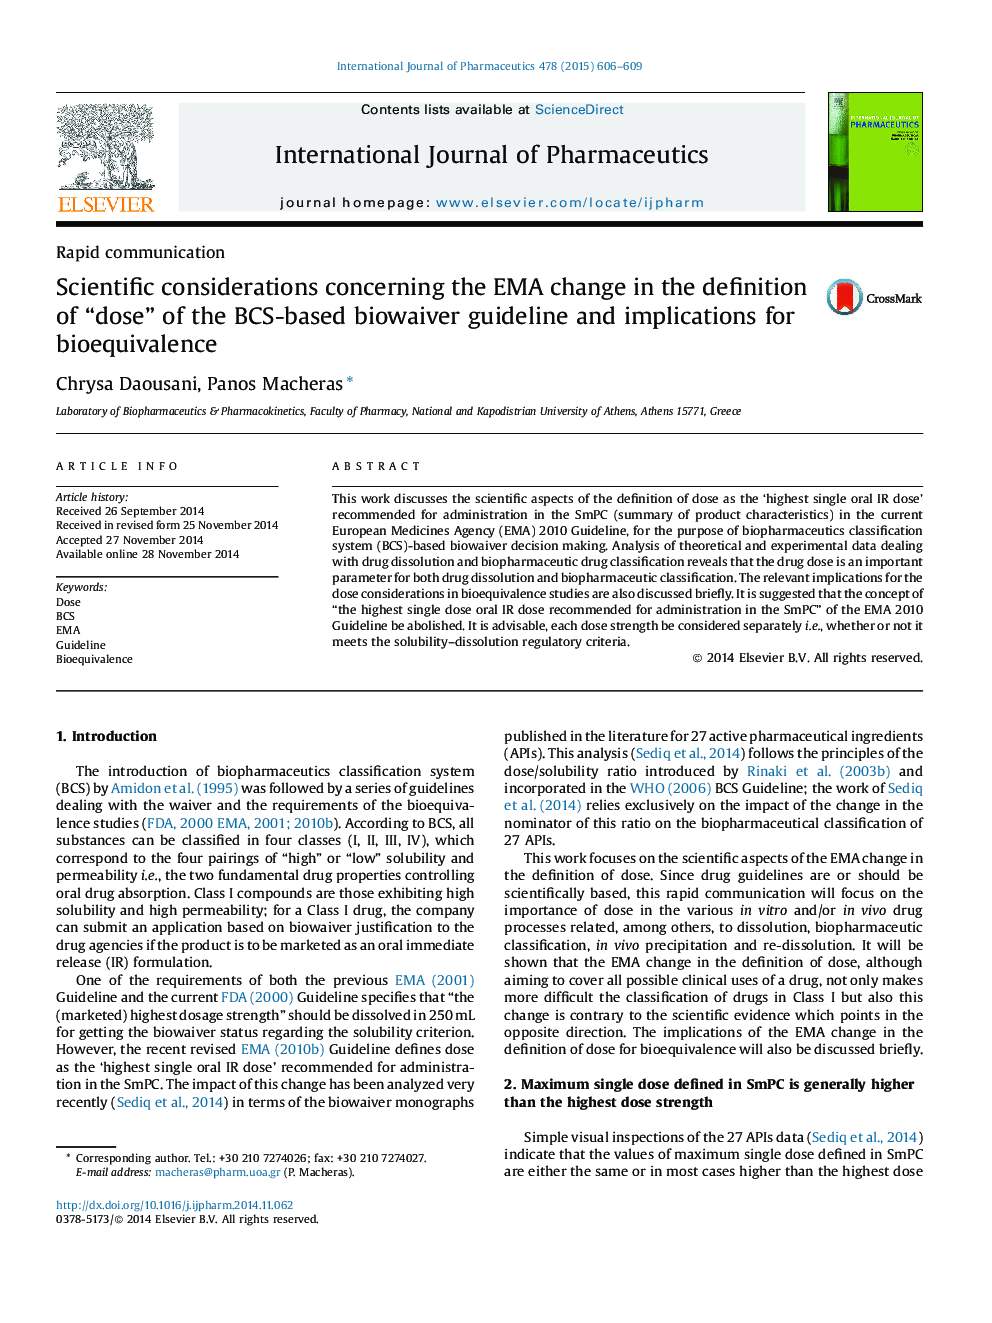 Scientific considerations concerning the EMA change in the definition of “dose” of the BCS-based biowaiver guideline and implications for bioequivalence